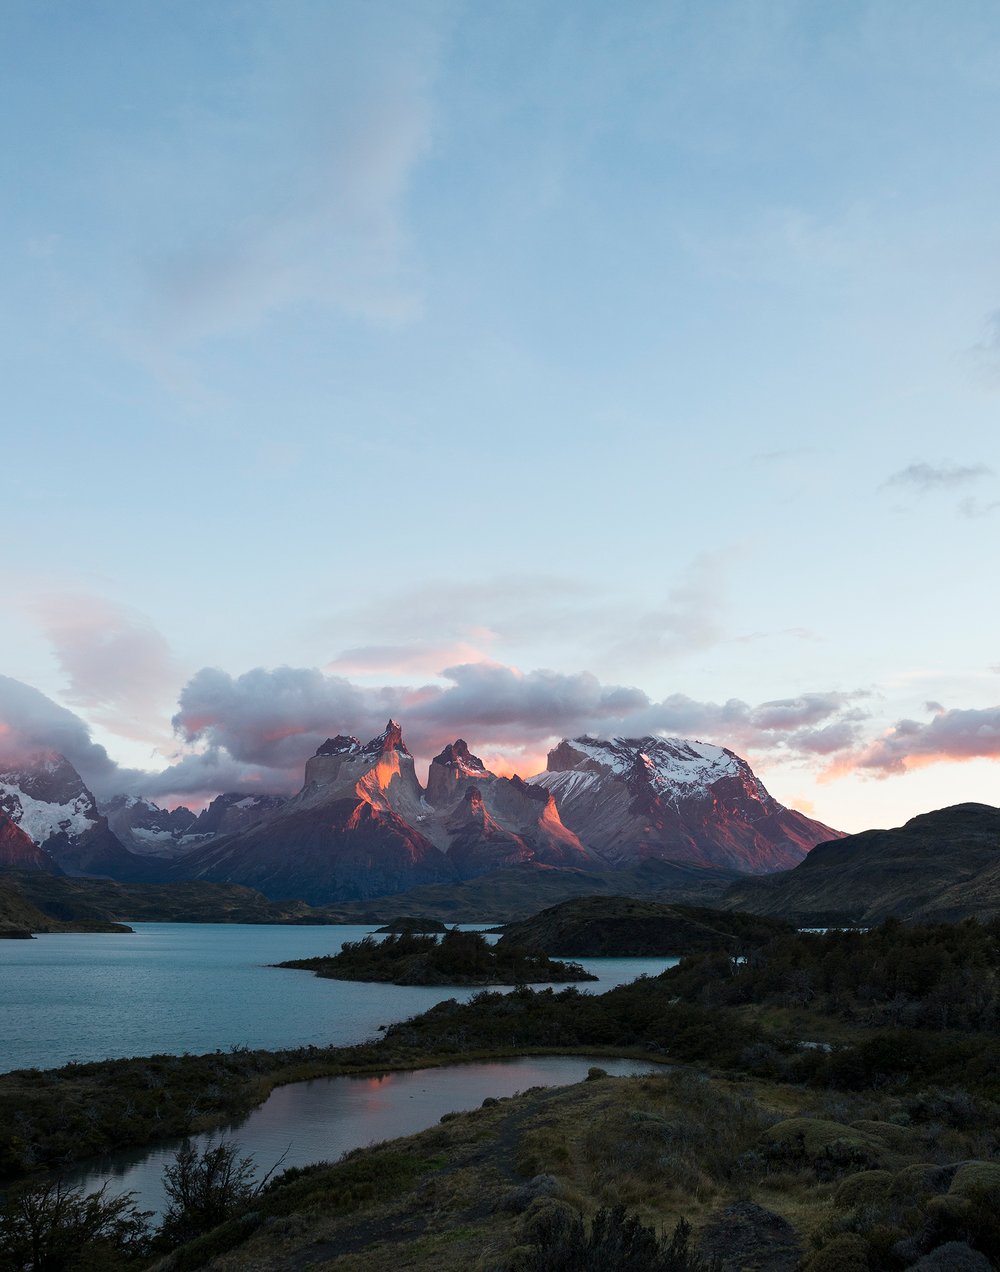 Image of Torres del Paine, Chile, 2016.